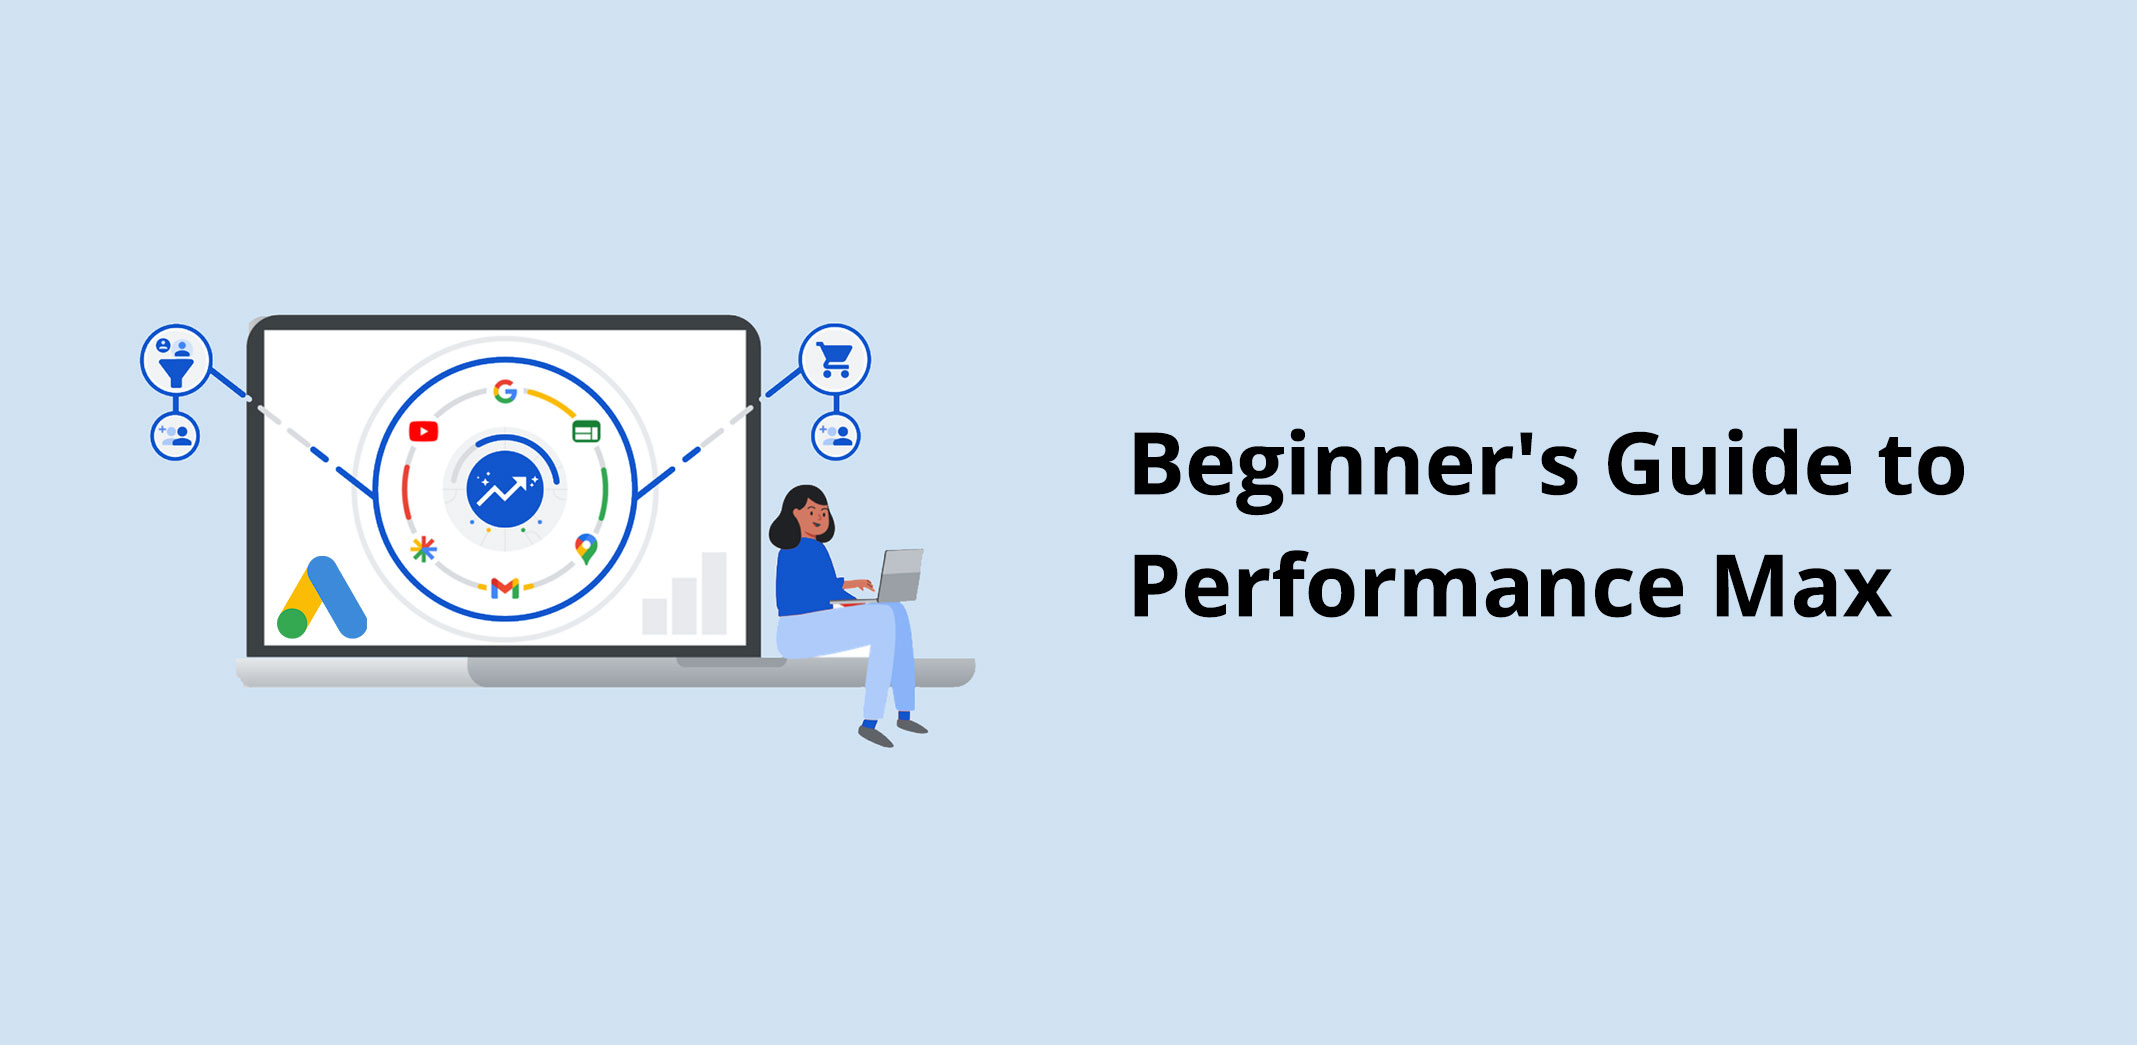 Beginner’s Guide to Performance Max